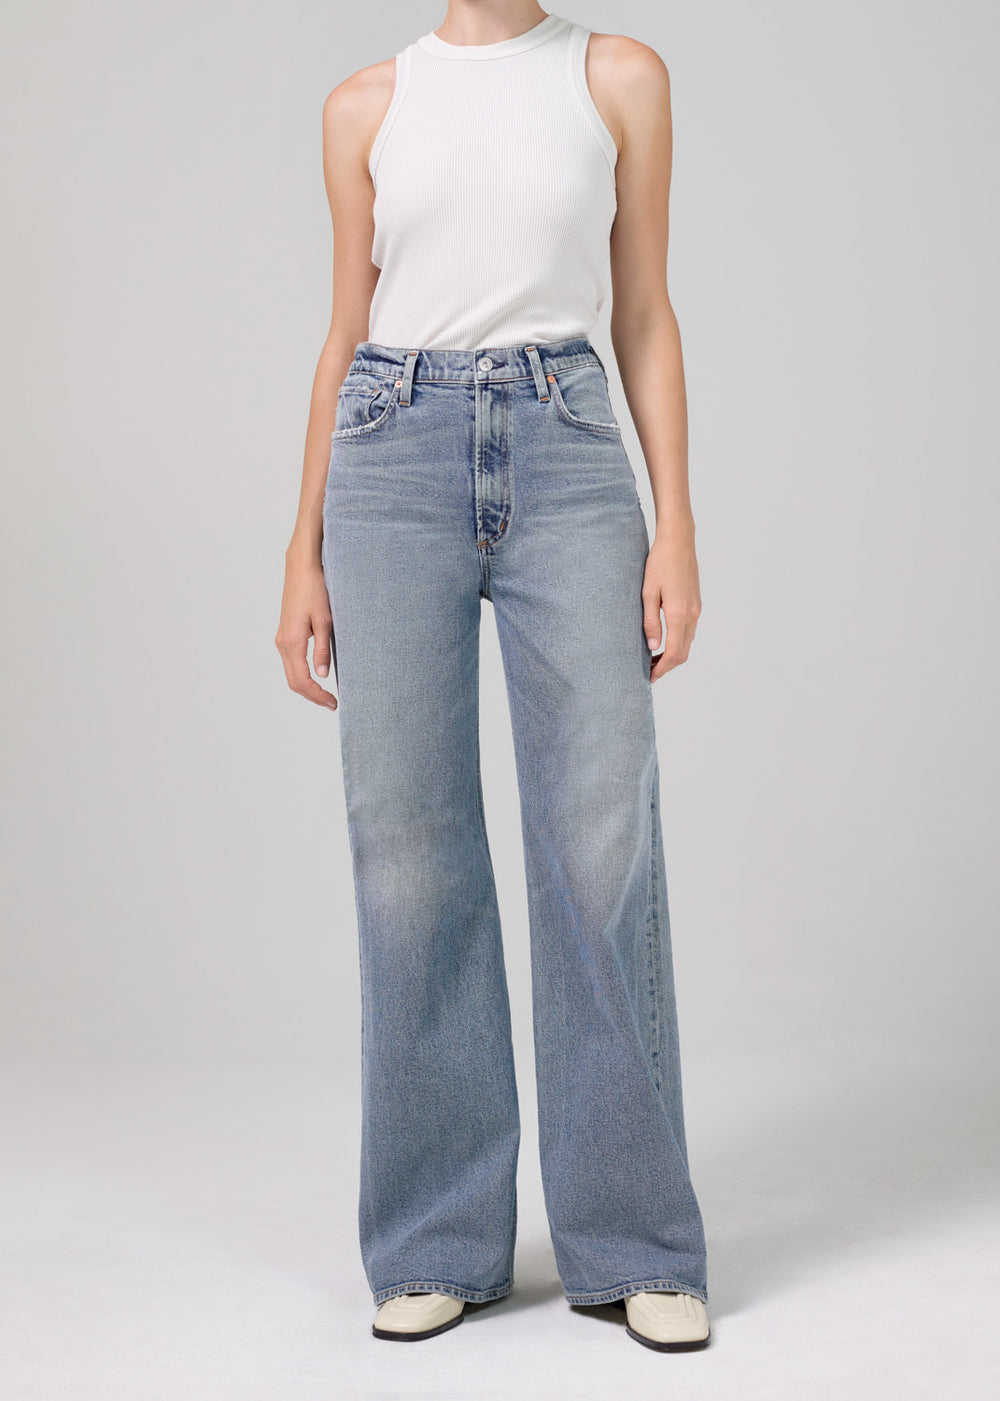 Citizens of Humanity Paloma wide leg baggy jean mischief | PIPE AND ROW